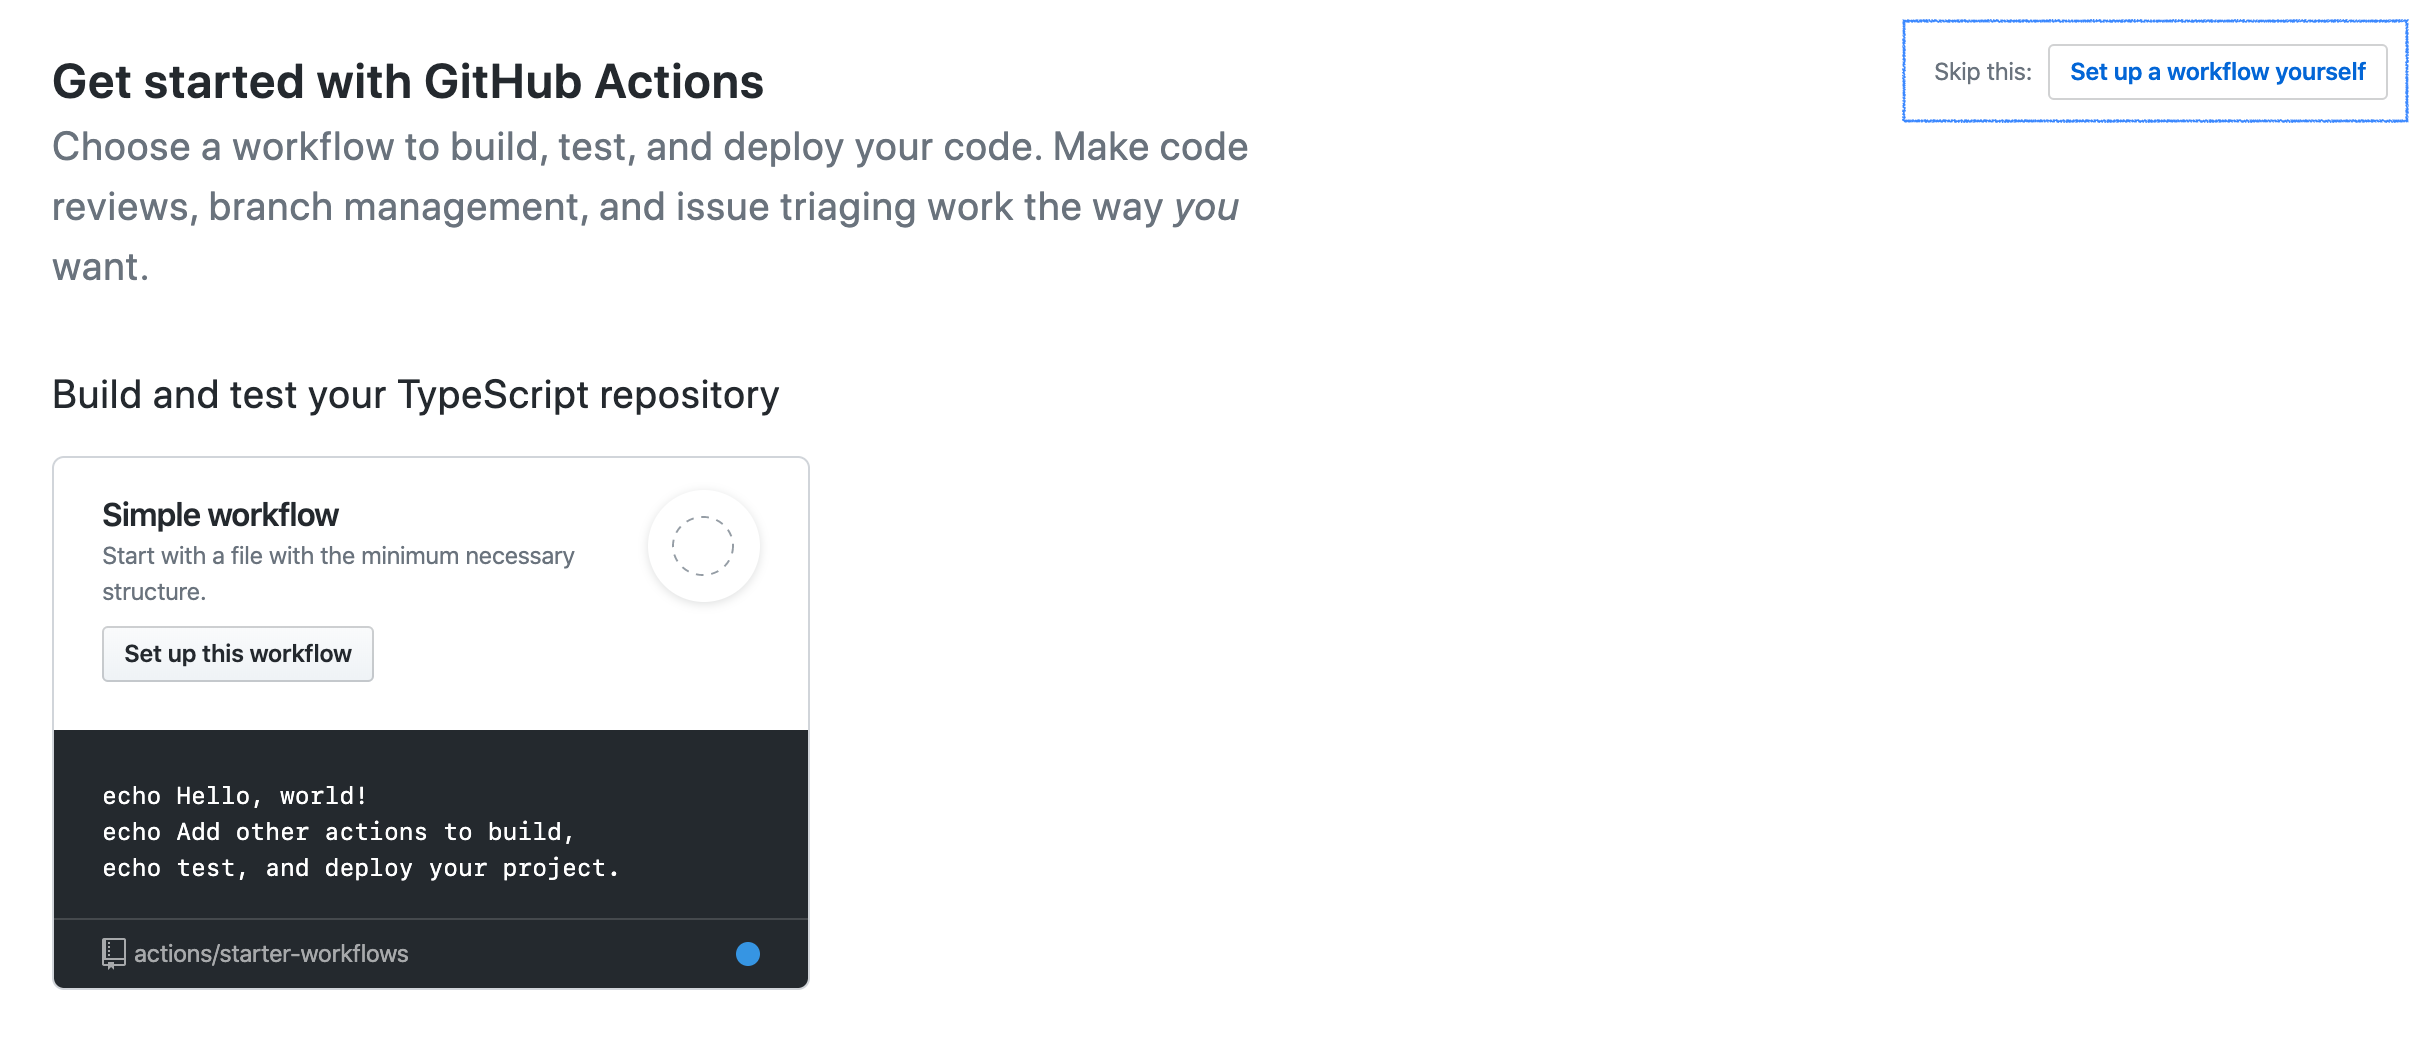 The “Actions” page for a repository, with an outline drawn around the “Set up a workflow yourself” button